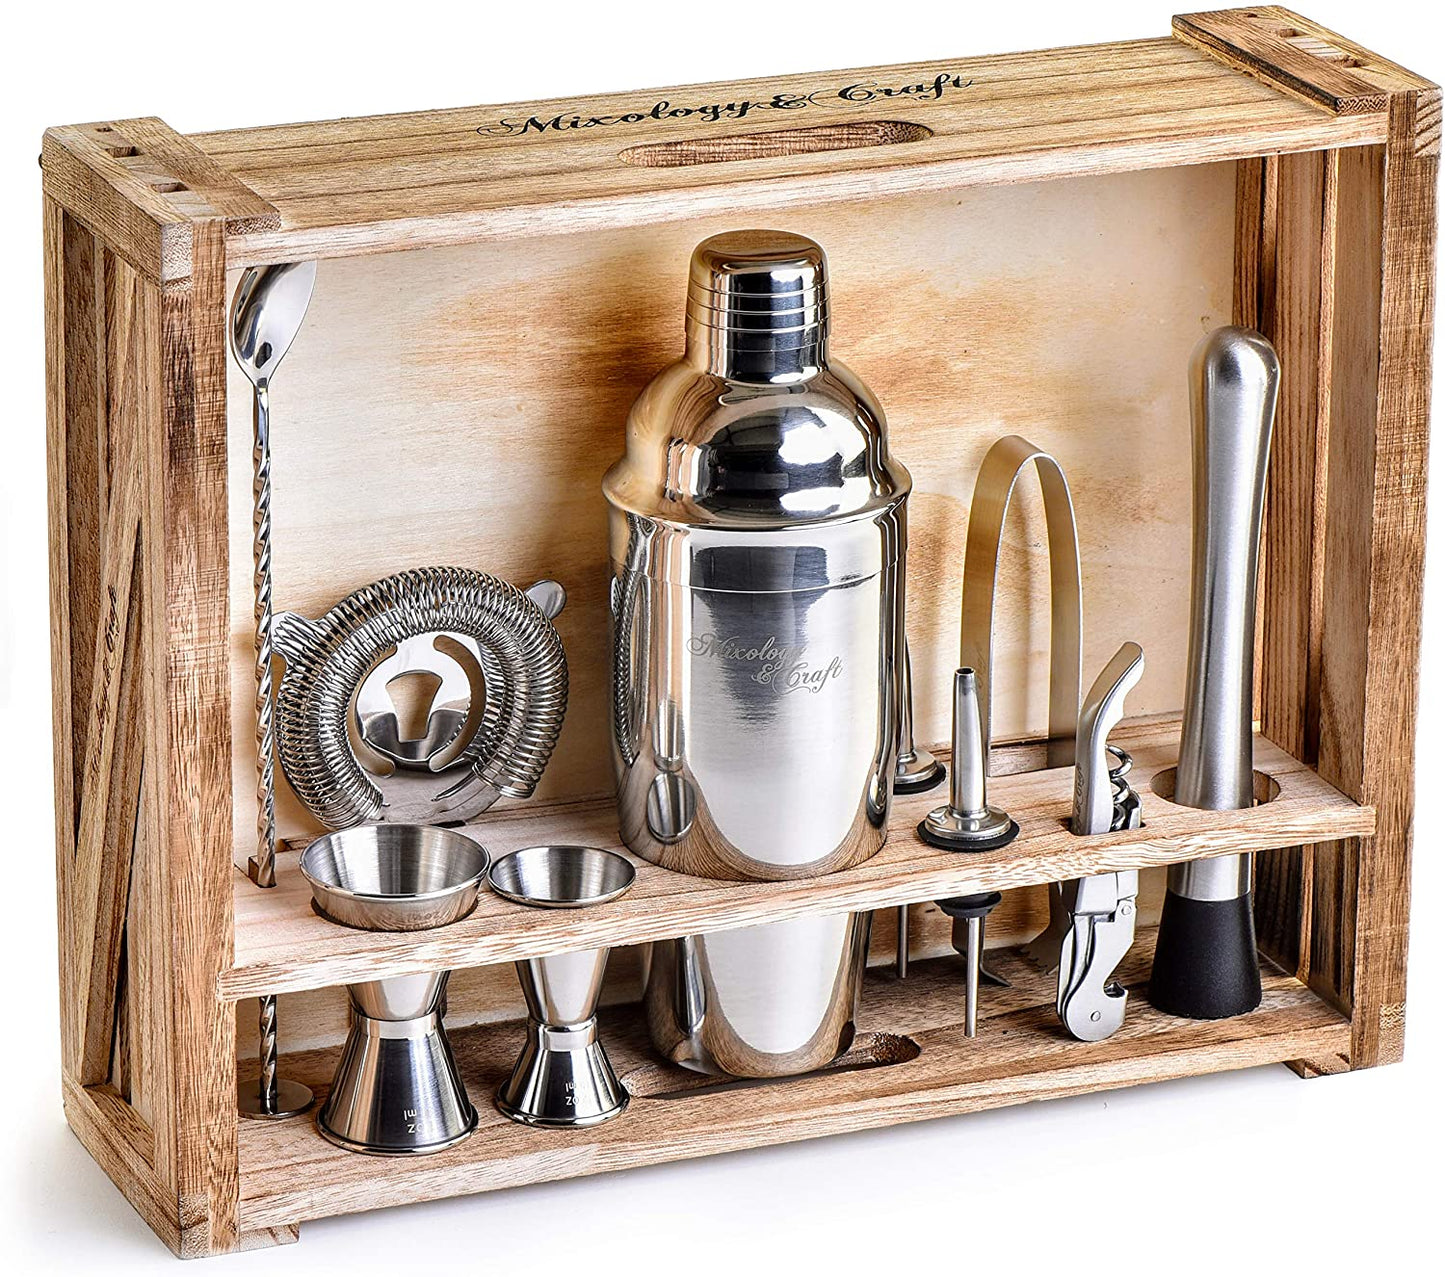 Bartender Kit: 11-Piece Bar Tool Set with Rustic Wood Stand | Perfect Home Bartending Kit and Cocktail Shaker Set for an Awesome Drink Mixing Experience (Gun-Metal Black)